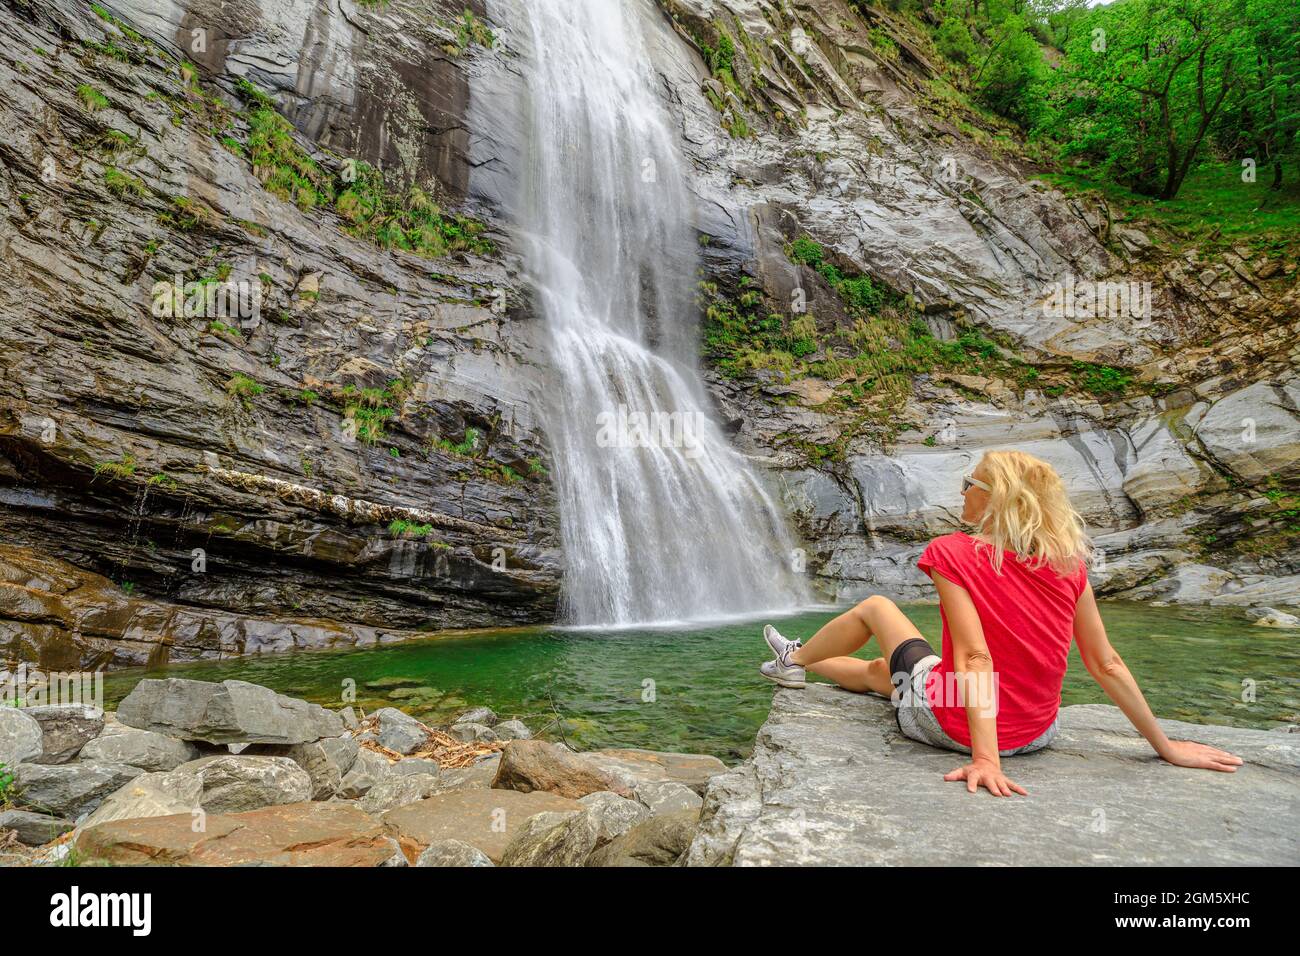 Woman sitting by the water of great waterfall of Bignasco, Valle Maggia, intersection point between the Bavona valley and Lavizzara valley, Cevio in Stock Photo